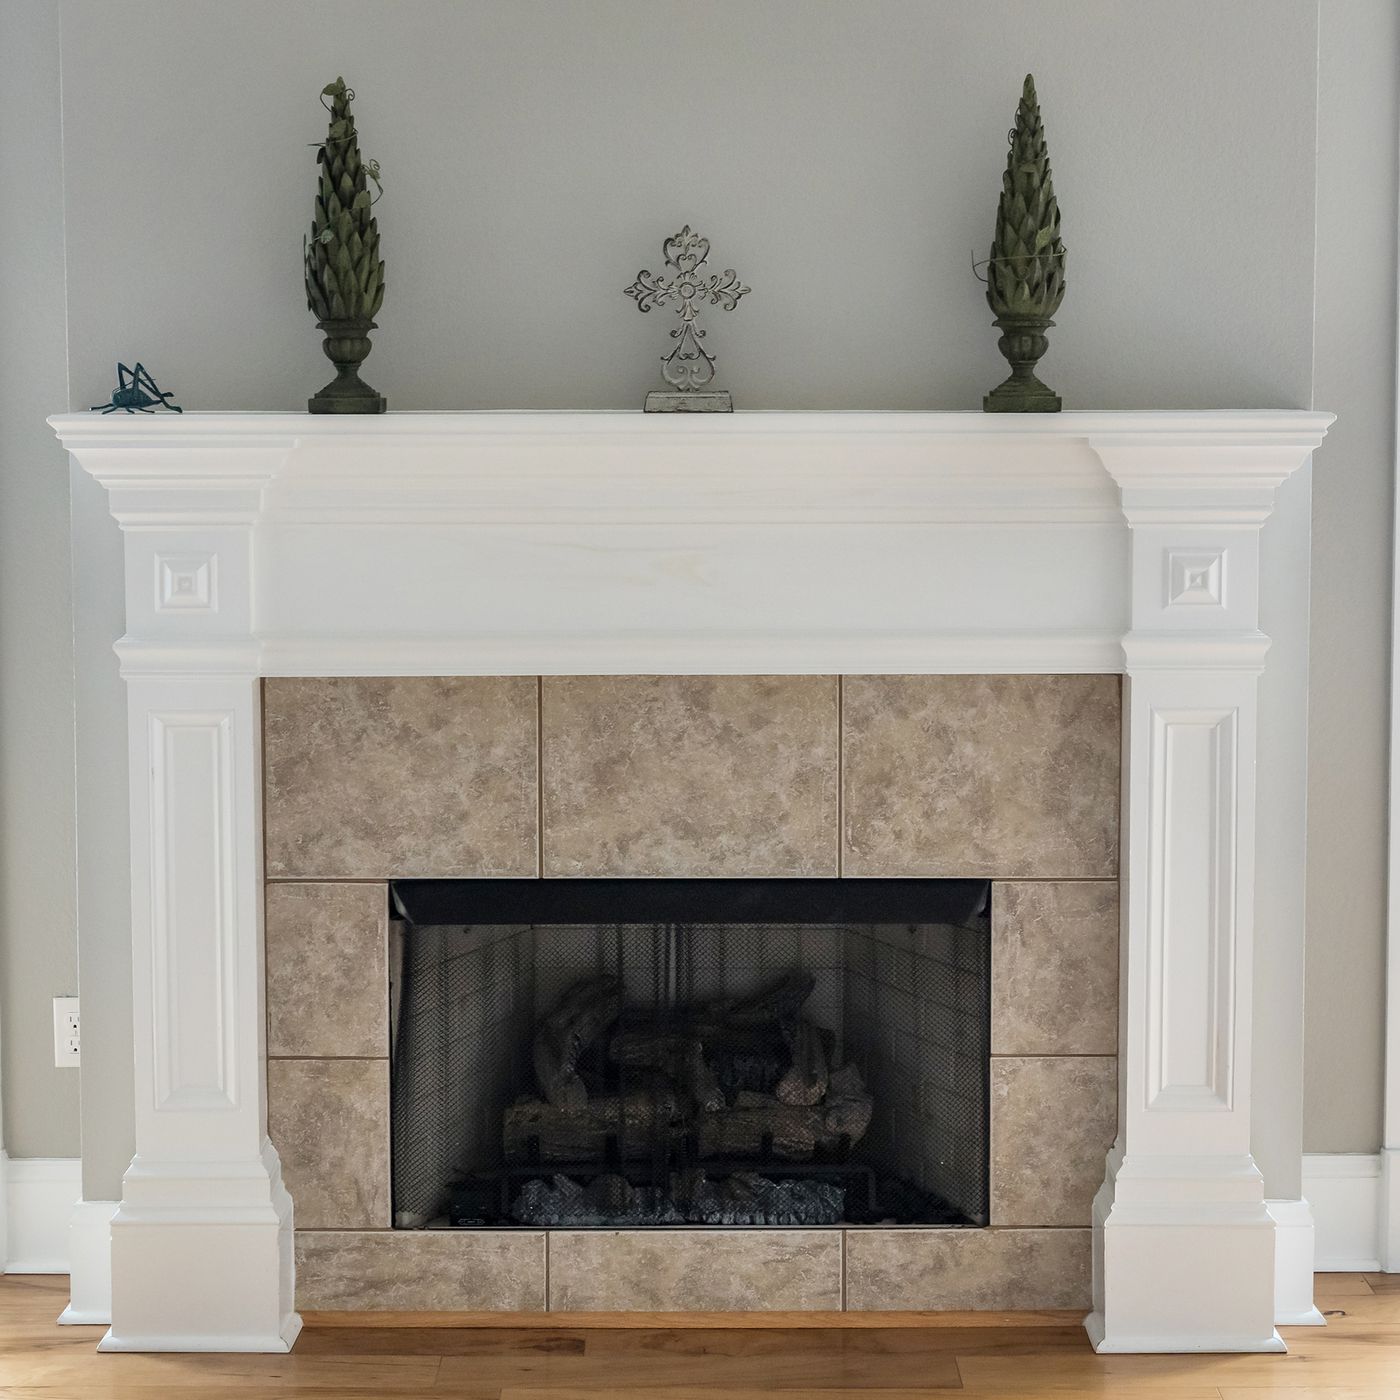 How To Build A Fireplace Mantel In 5 Steps This Old House